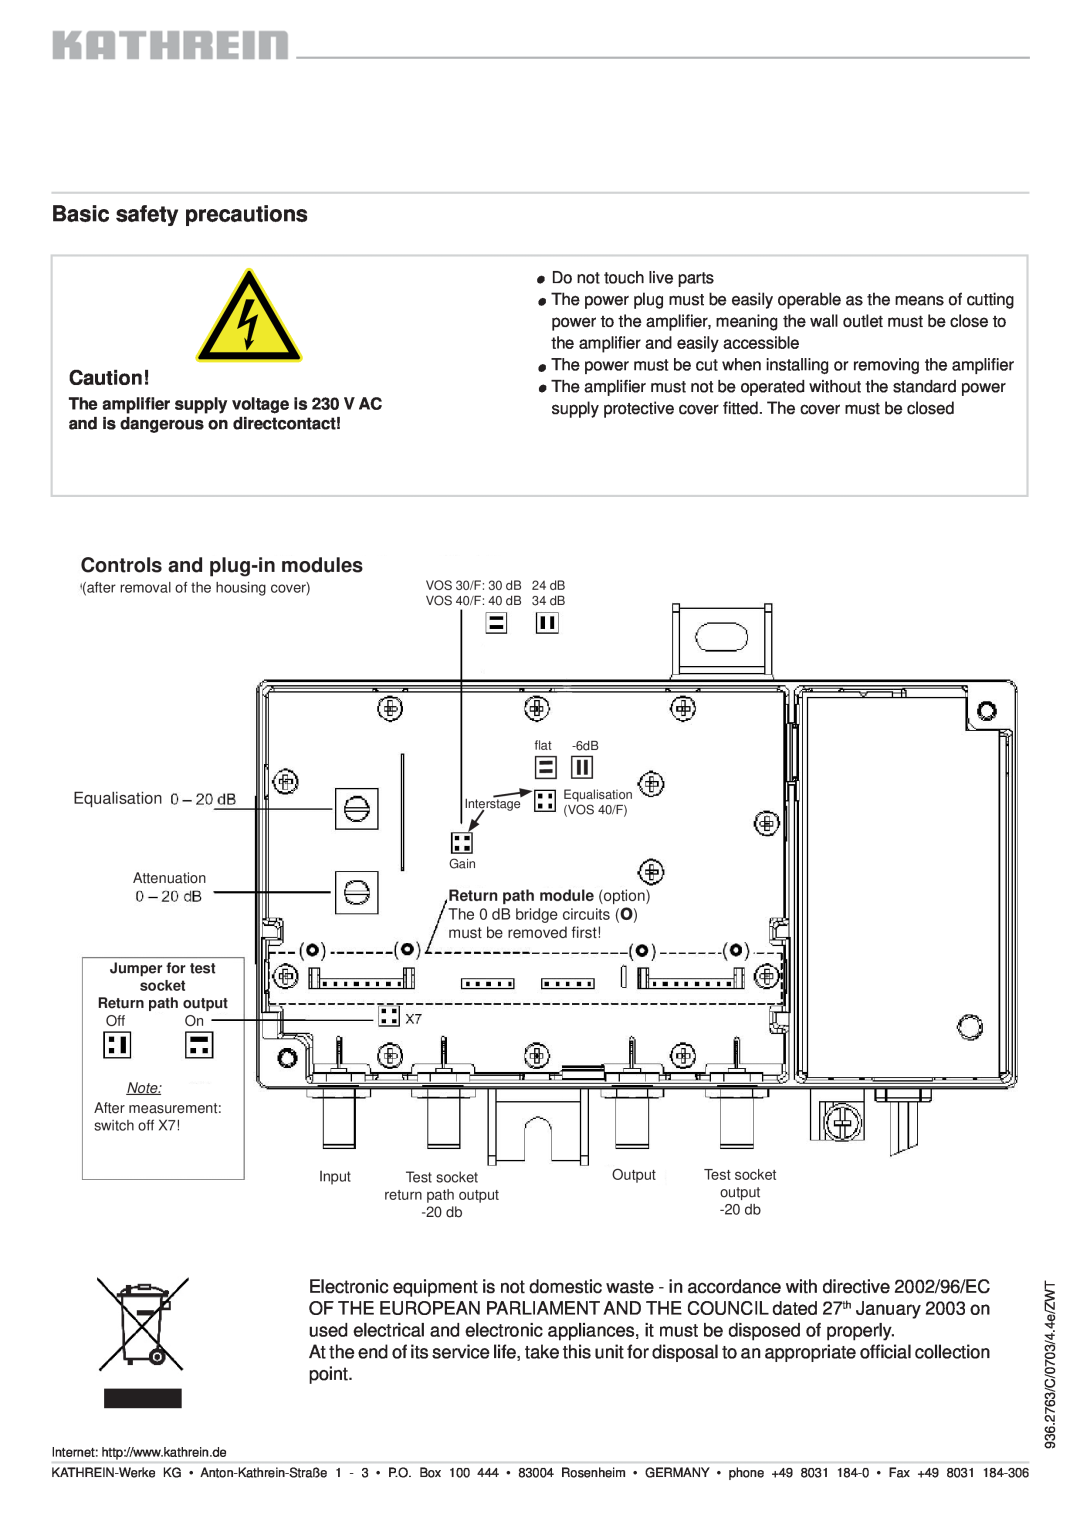 Kathrein VOS 40/F, VOS 30/F manual Basic safety precautions, Controls and plug-in modules 